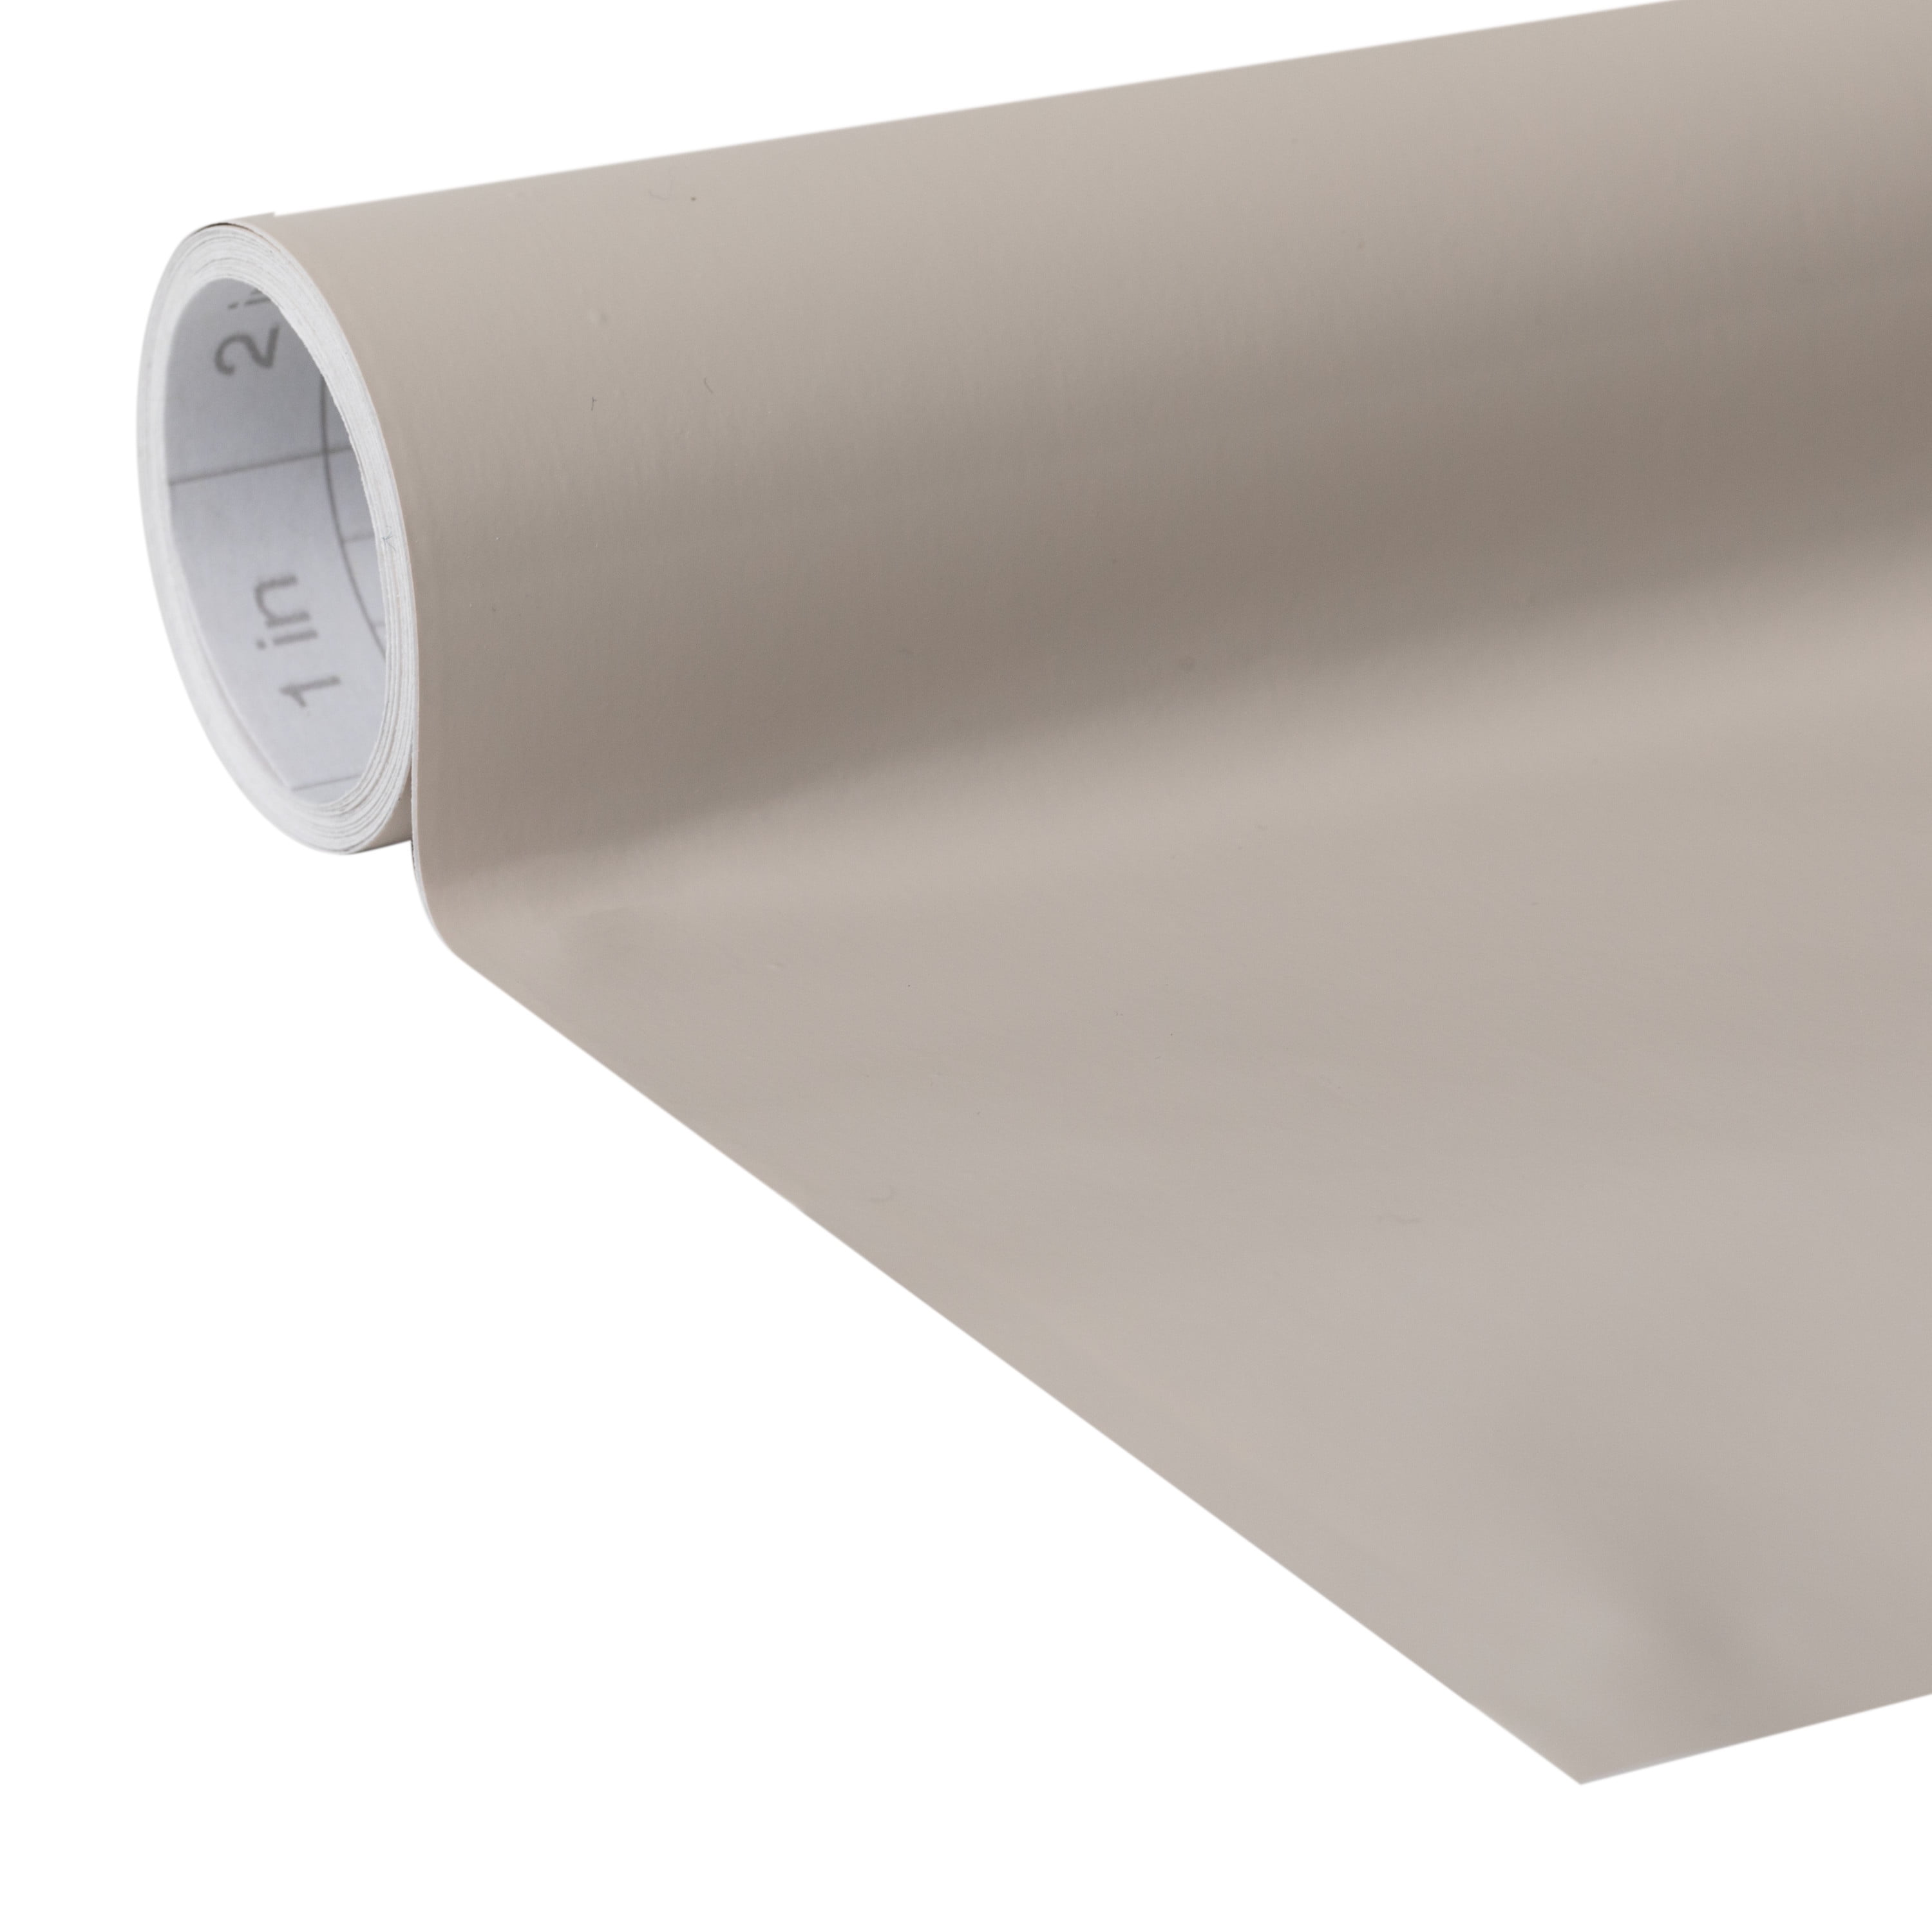 EasyLiner Brand Contact Paper Adhesive Shelf Liner 18 in. x 9 ft., Taupe